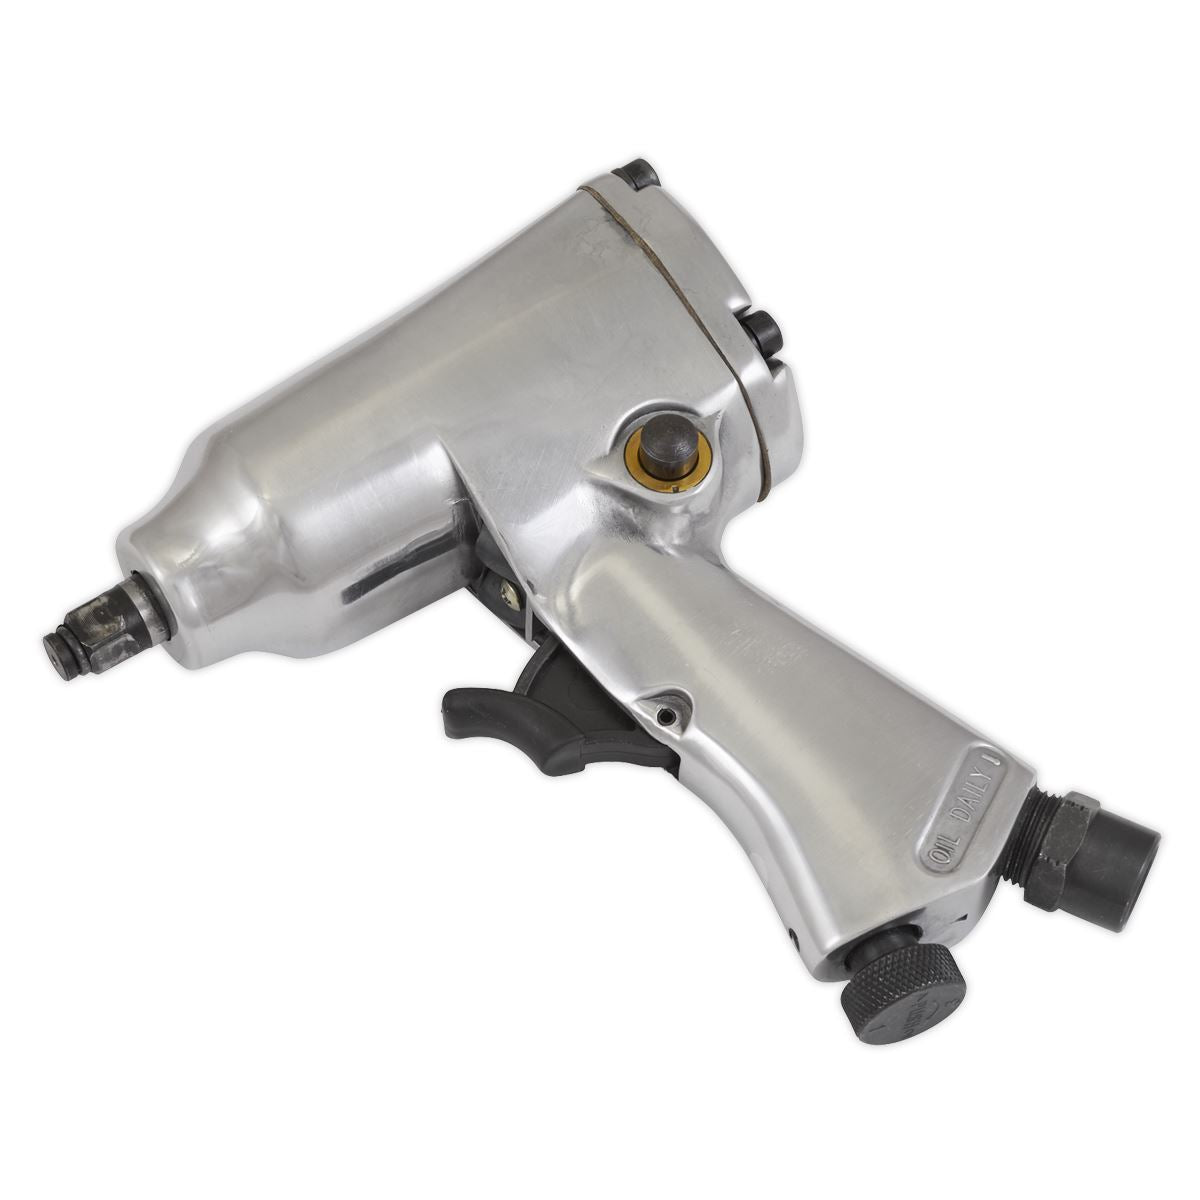 Sealey 3/8" Square Drive Heavy-Duty Air Impact Wrench